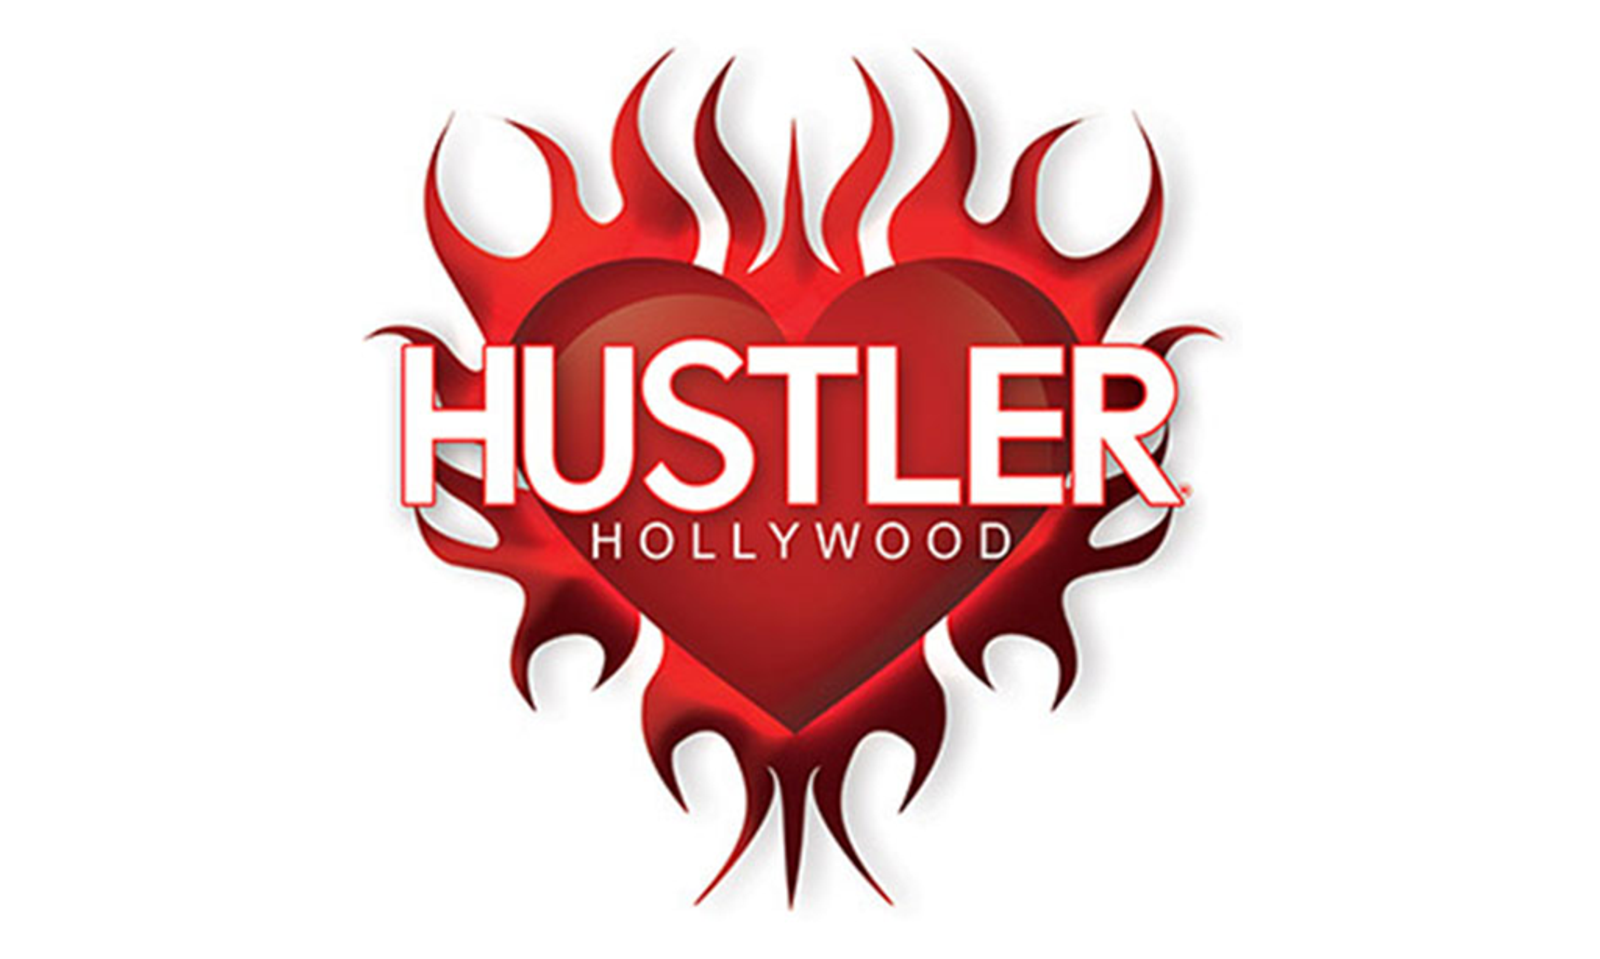 Hustler Hollywood Announces Opening Date for New Santa Ana Store